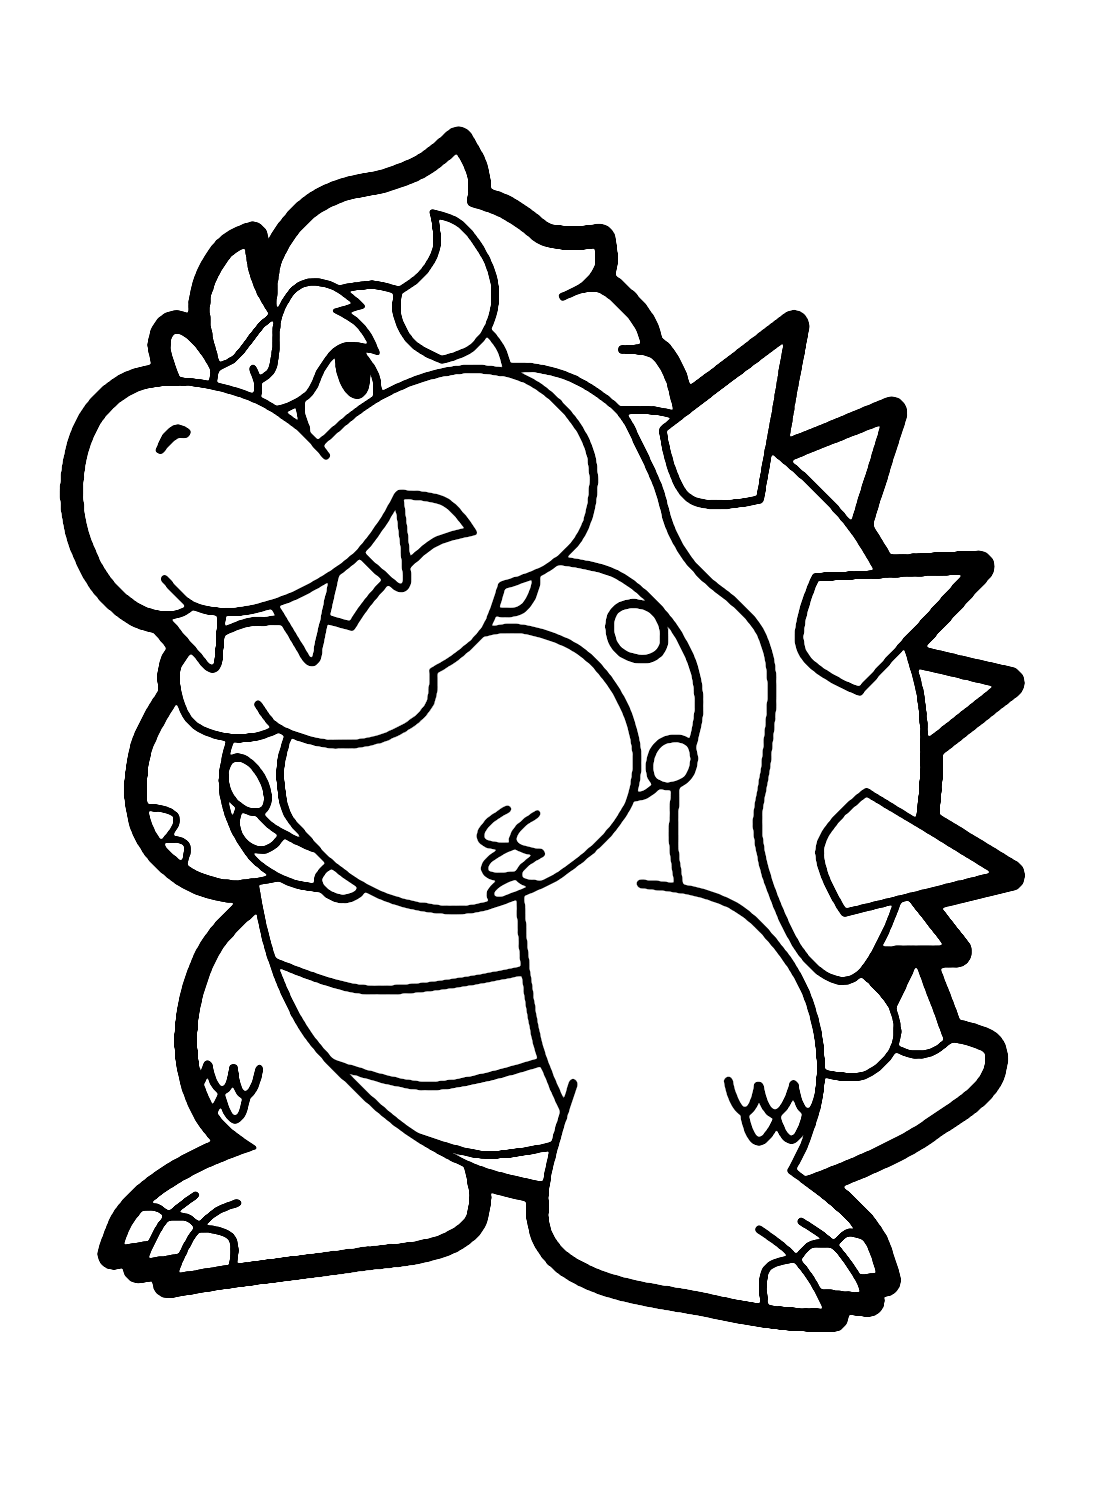 Bowser from Super Mario Coloring Pages